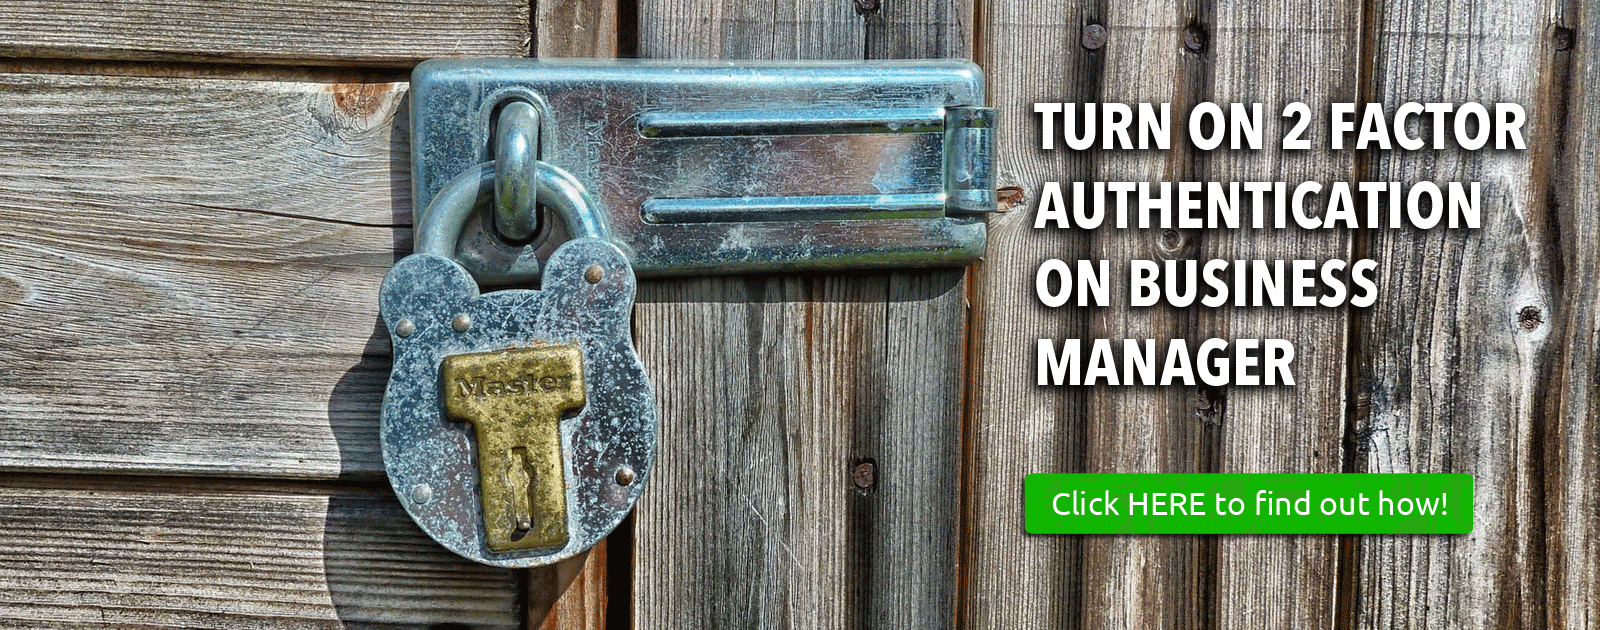 Turn on 2 factor authentication on Business Manager